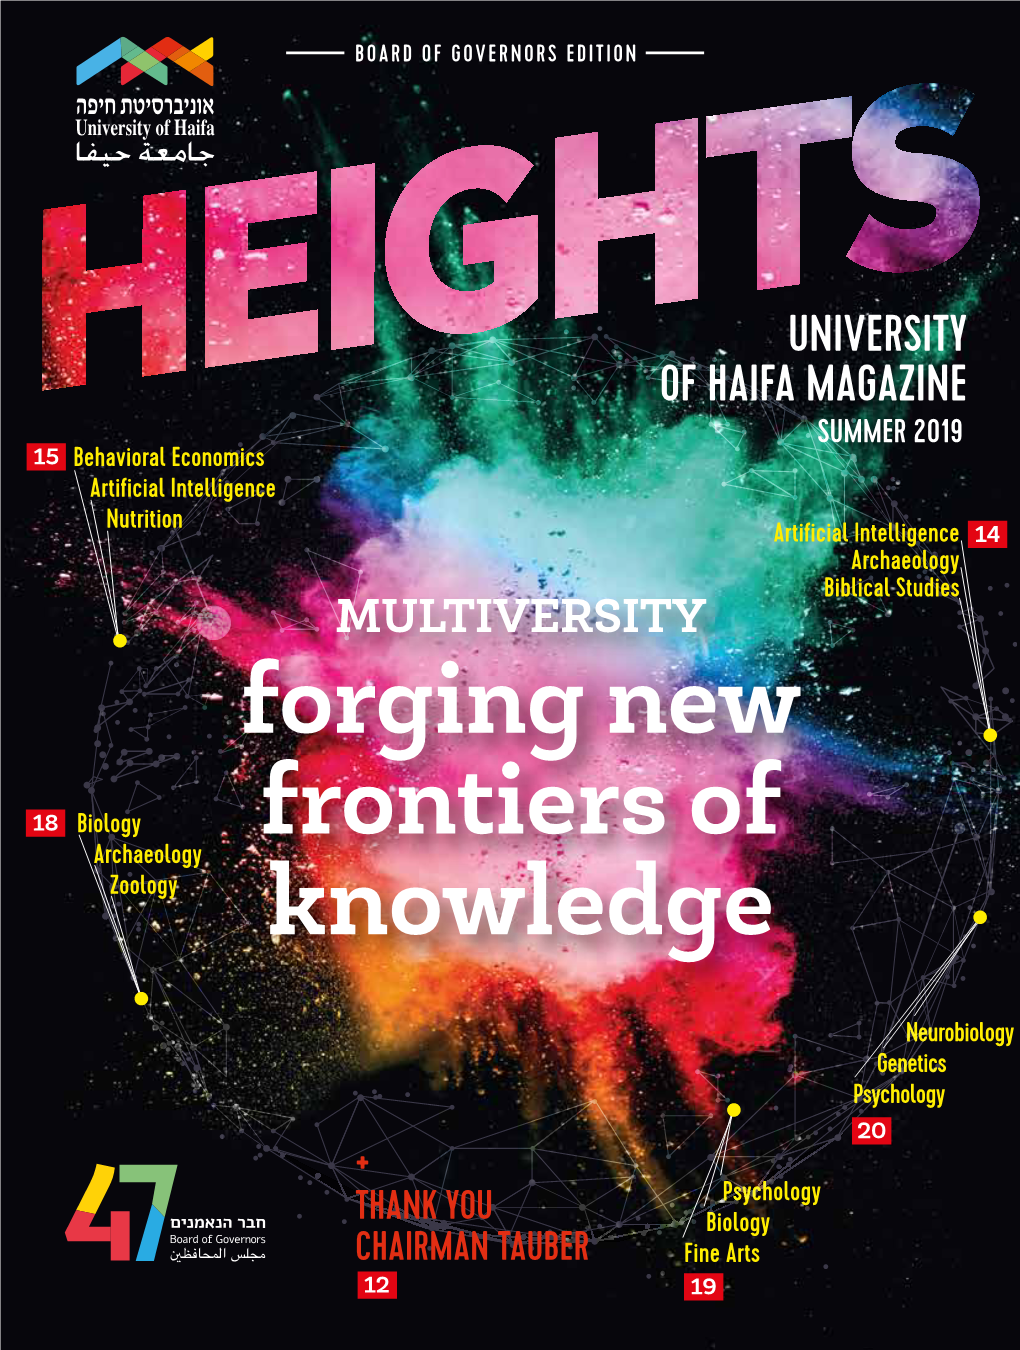 Forging New Frontiers of Knowledge